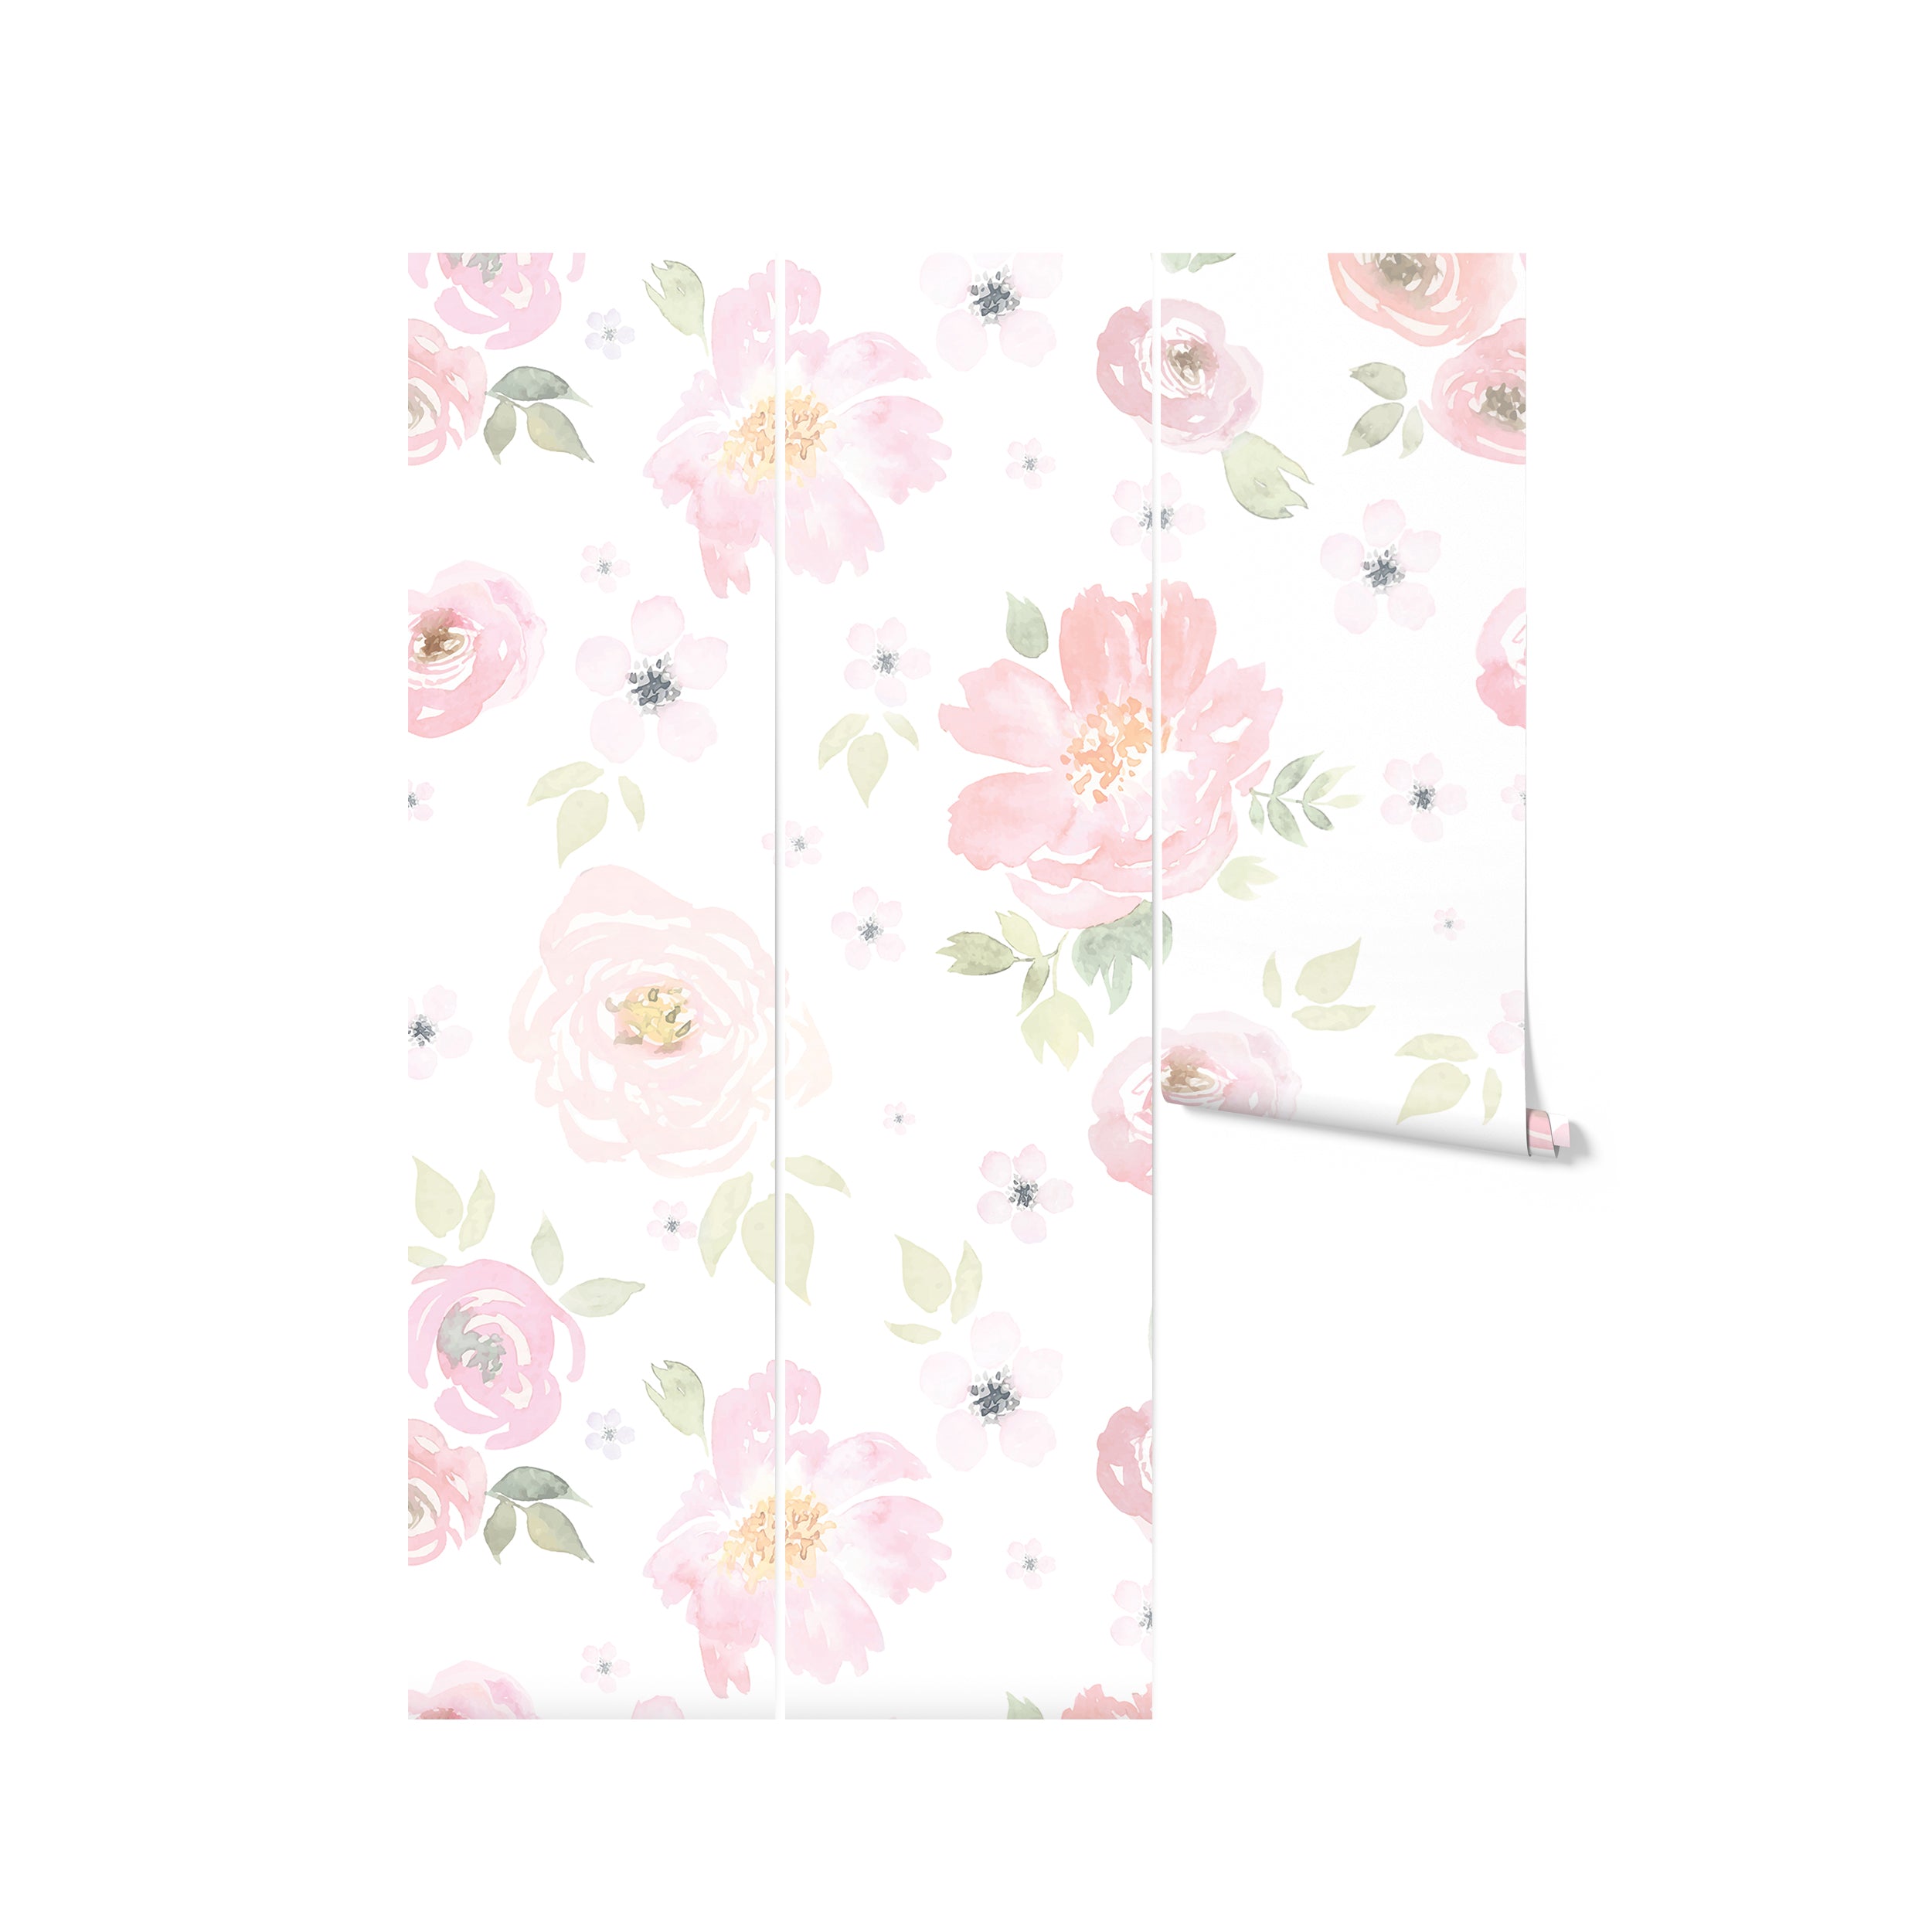 A roll of Gentle Blossom Wallpaper - 75", partially unrolled to reveal the beautiful pink floral print against a clean white background. This wallpaper is ideal for adding a gentle, floral touch to rooms, enhancing the area with its subtle and serene pattern.